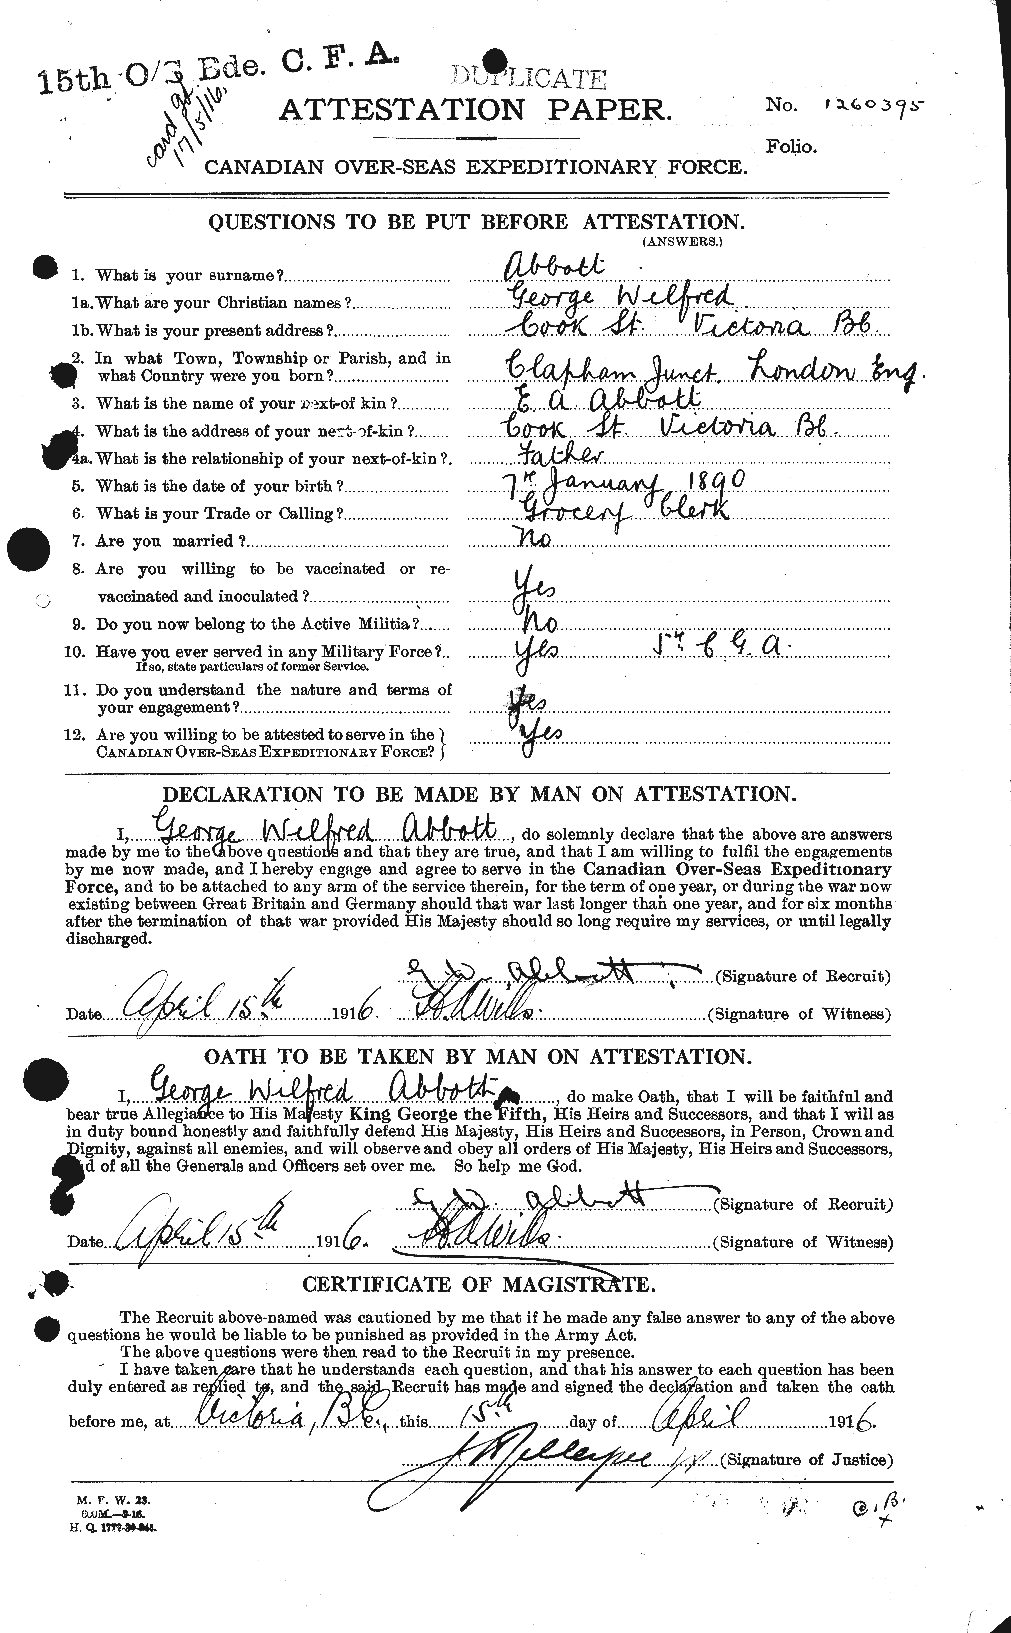 Personnel Records of the First World War - CEF 200947a